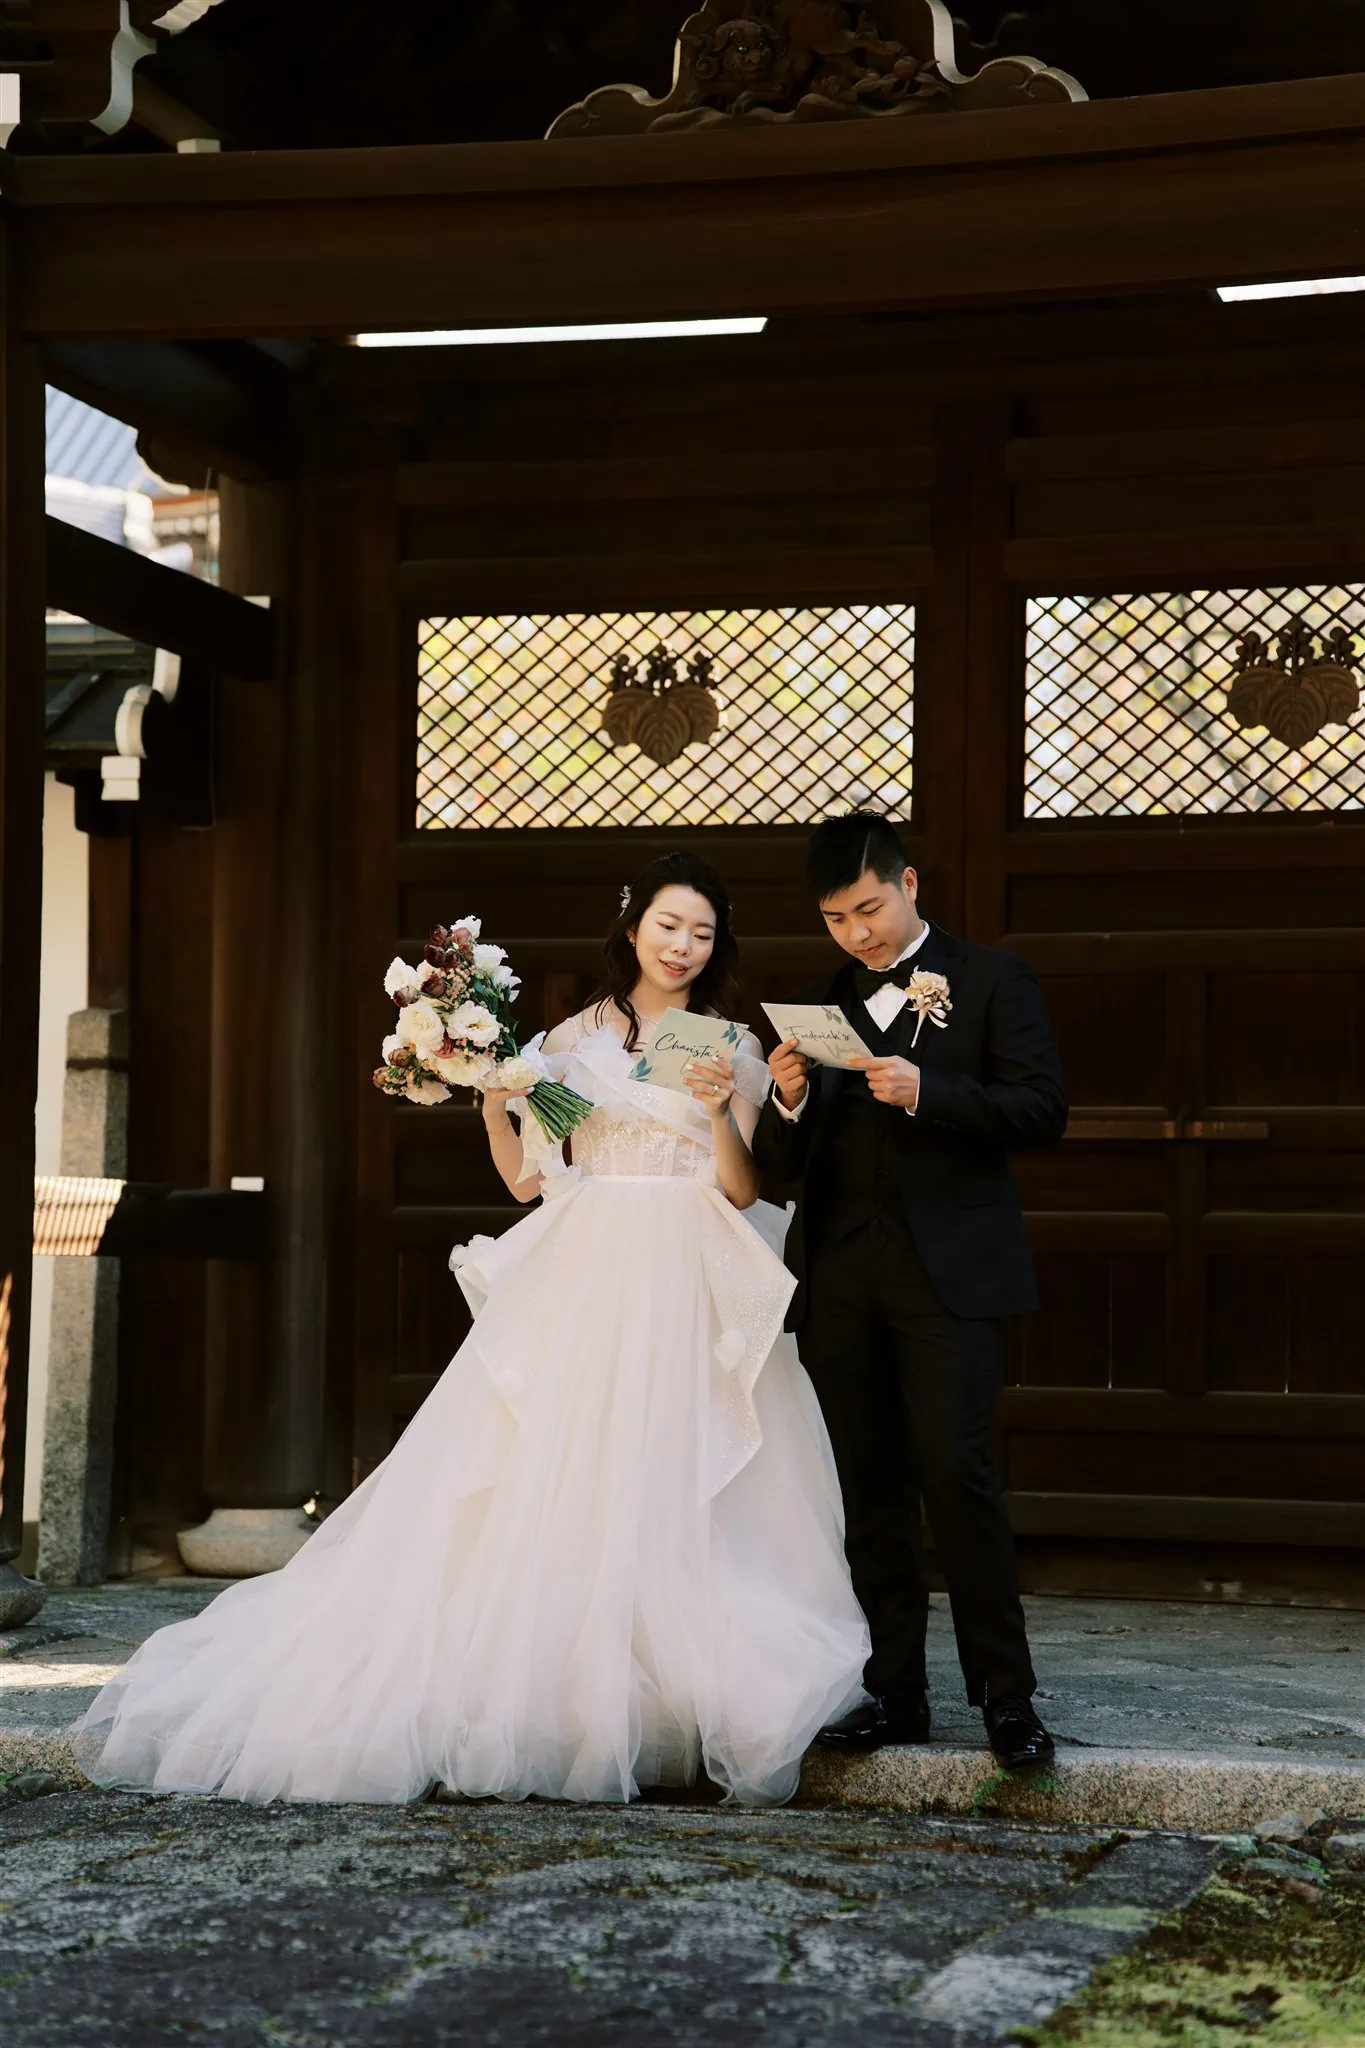 Kyoto Tokyo Japan Elopement Wedding Photographer, Planner & Videographer | A Japan elopement photographer captures a bride and groom standing in front of a temple.